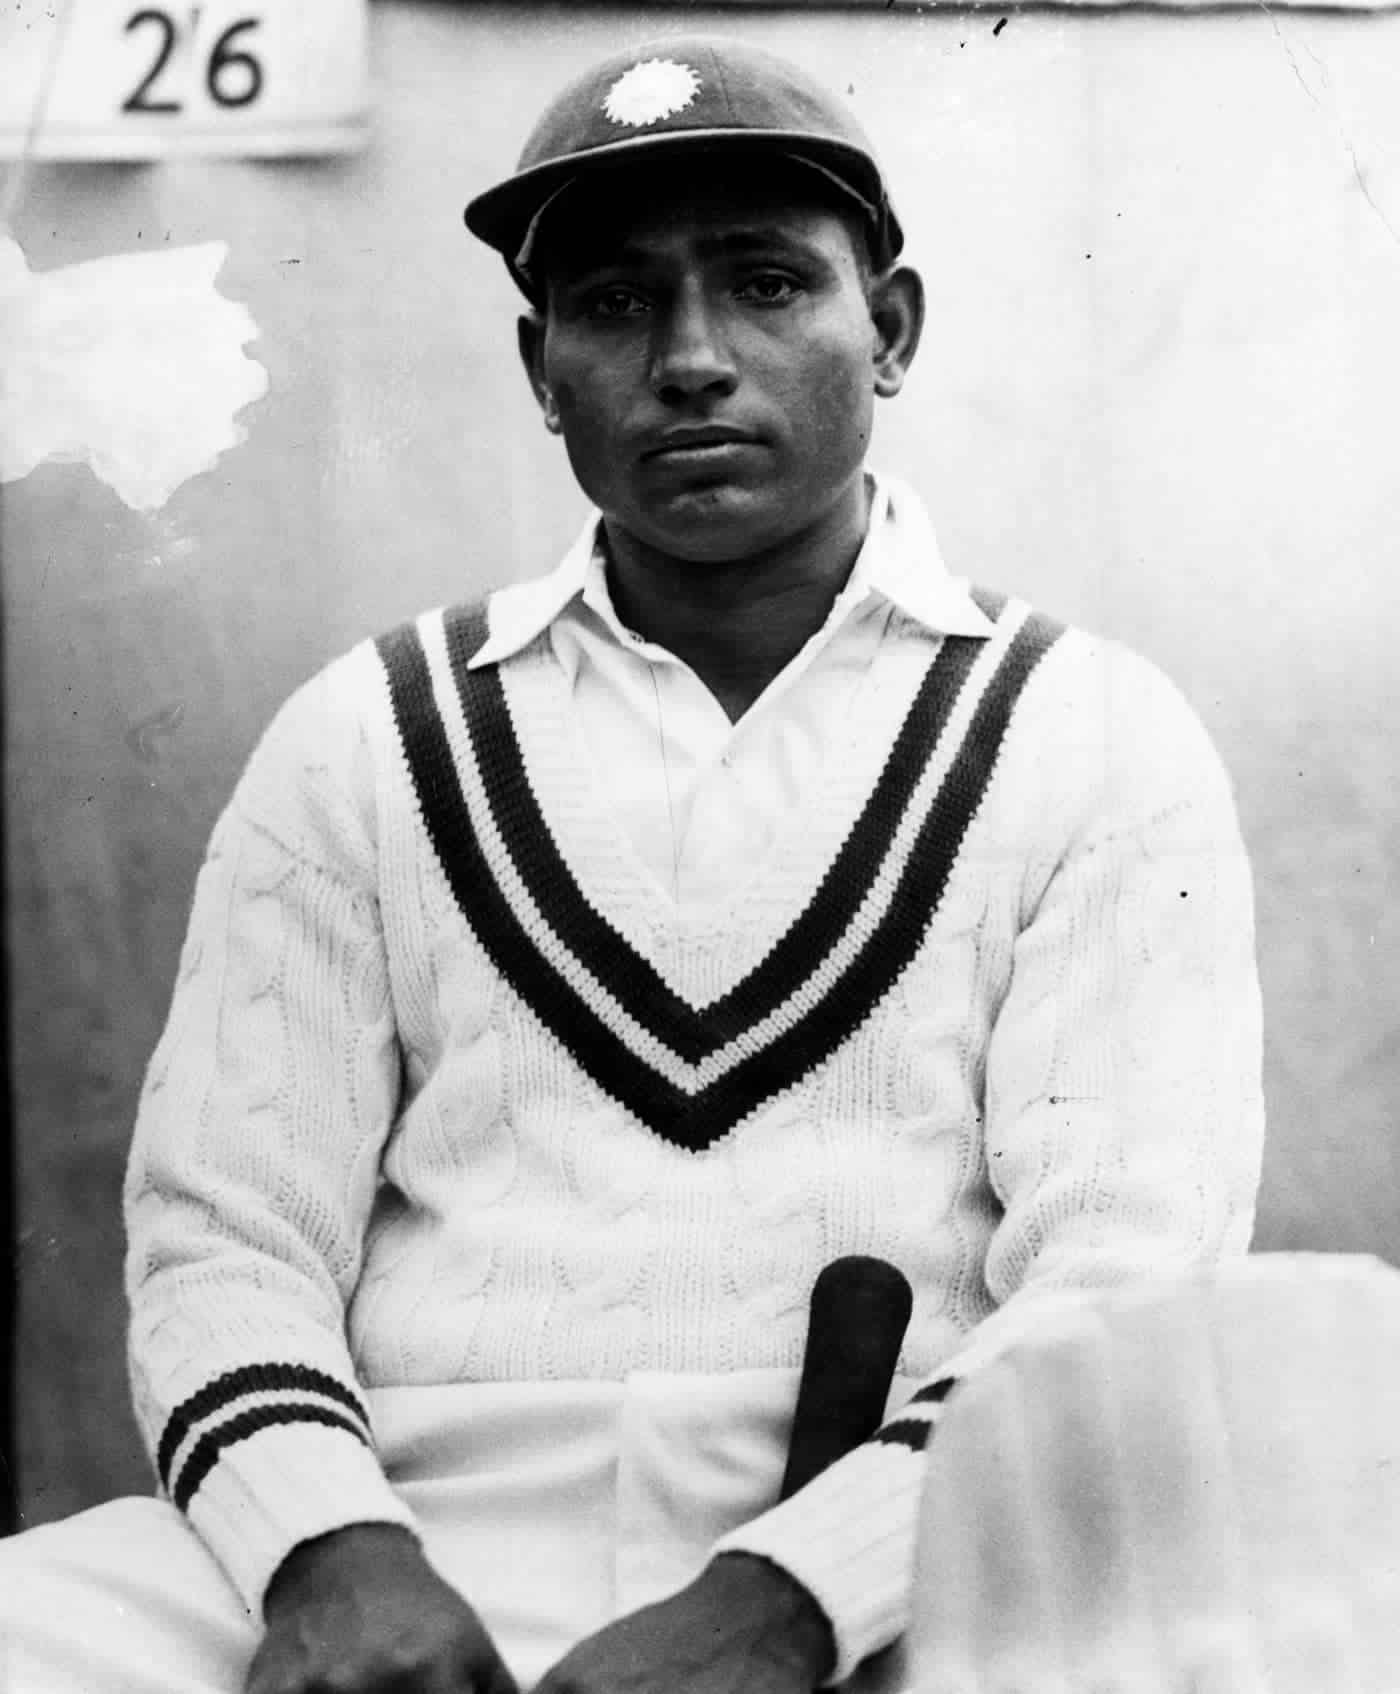 Indian cricketer, first batsman to score a century for India, lala amarnath son, first test century by indian, mohinder amarnath, lala amarnath in marathi, lala amarnath kisse, lala amarnath stories in marathi, lala amarnath information, लाला अमरनाथ, लाला अमरनाथ किस्से, क्रिकेट
